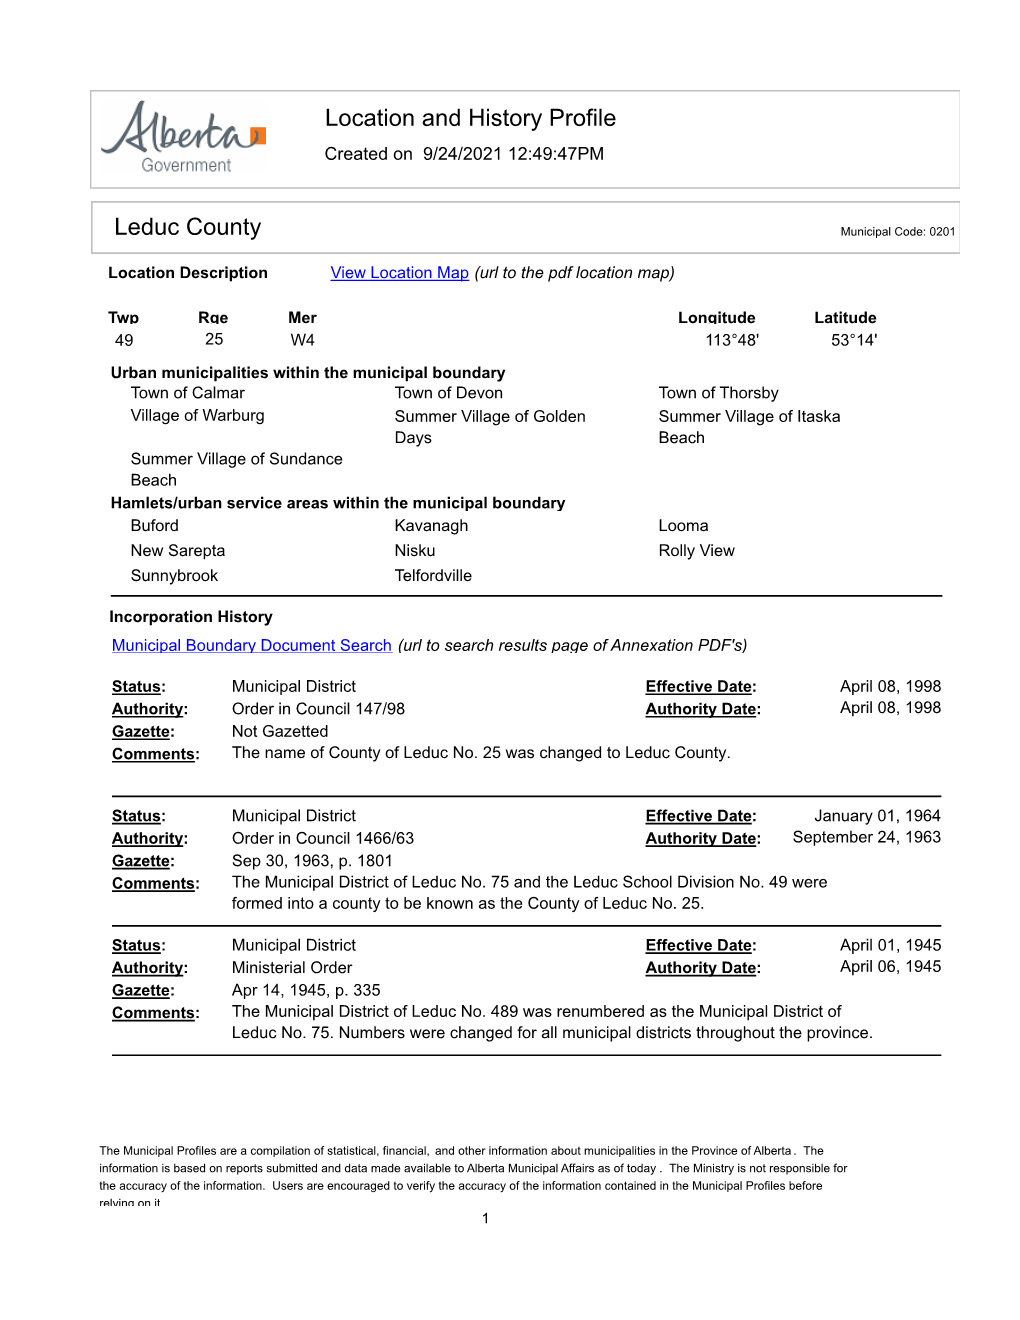 Location and History Profile Leduc County